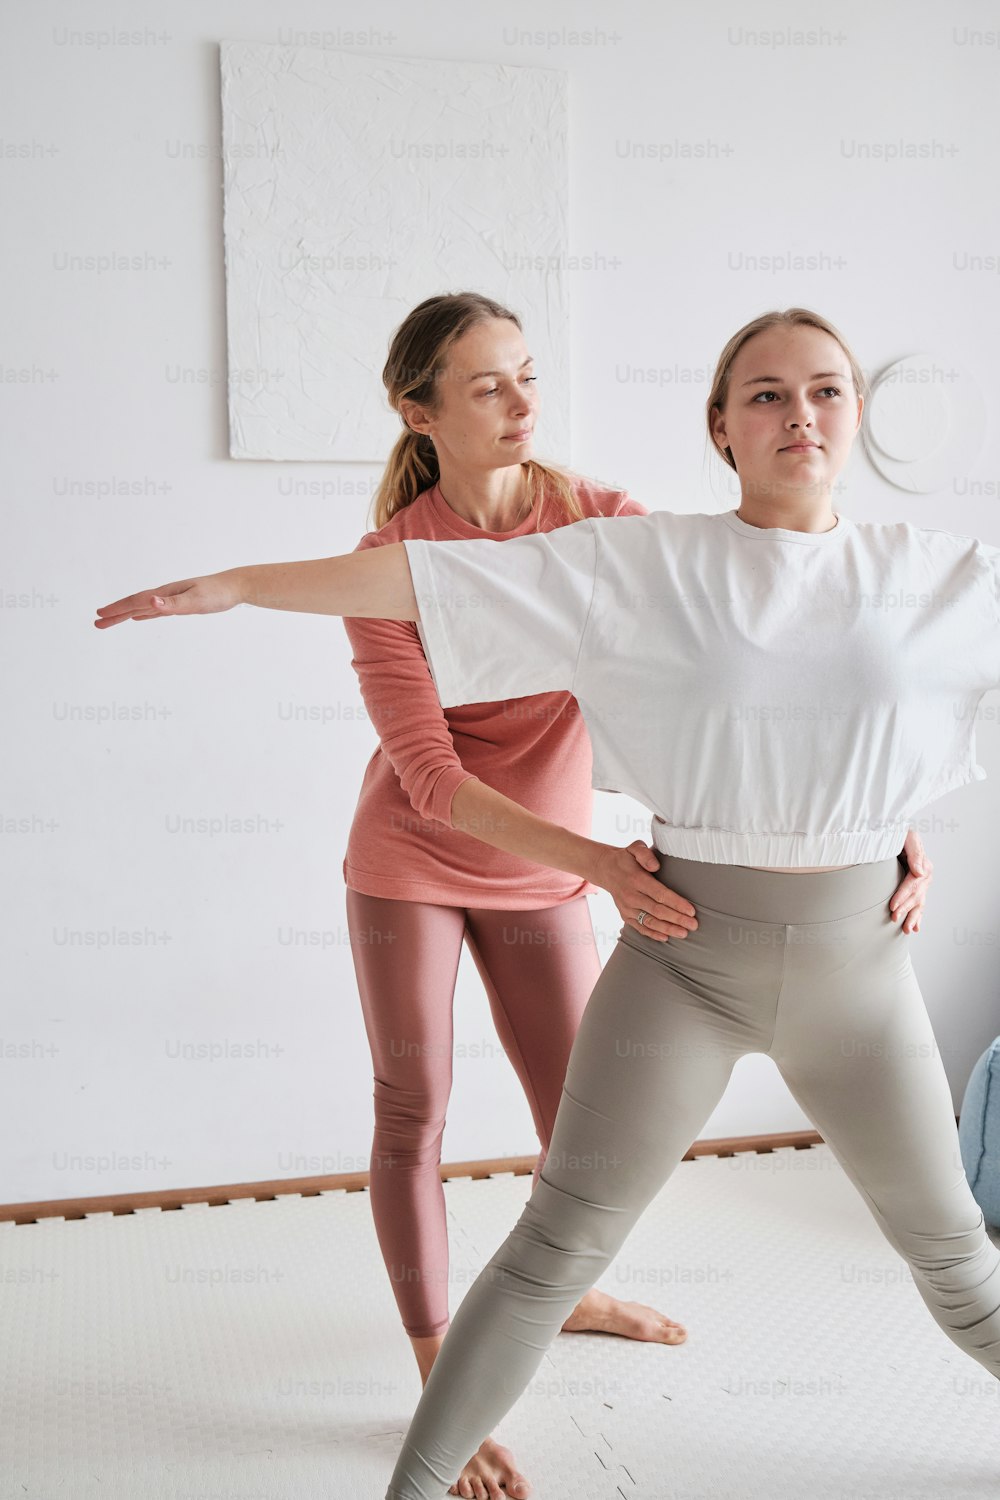 two women are doing yoga poses in a studio